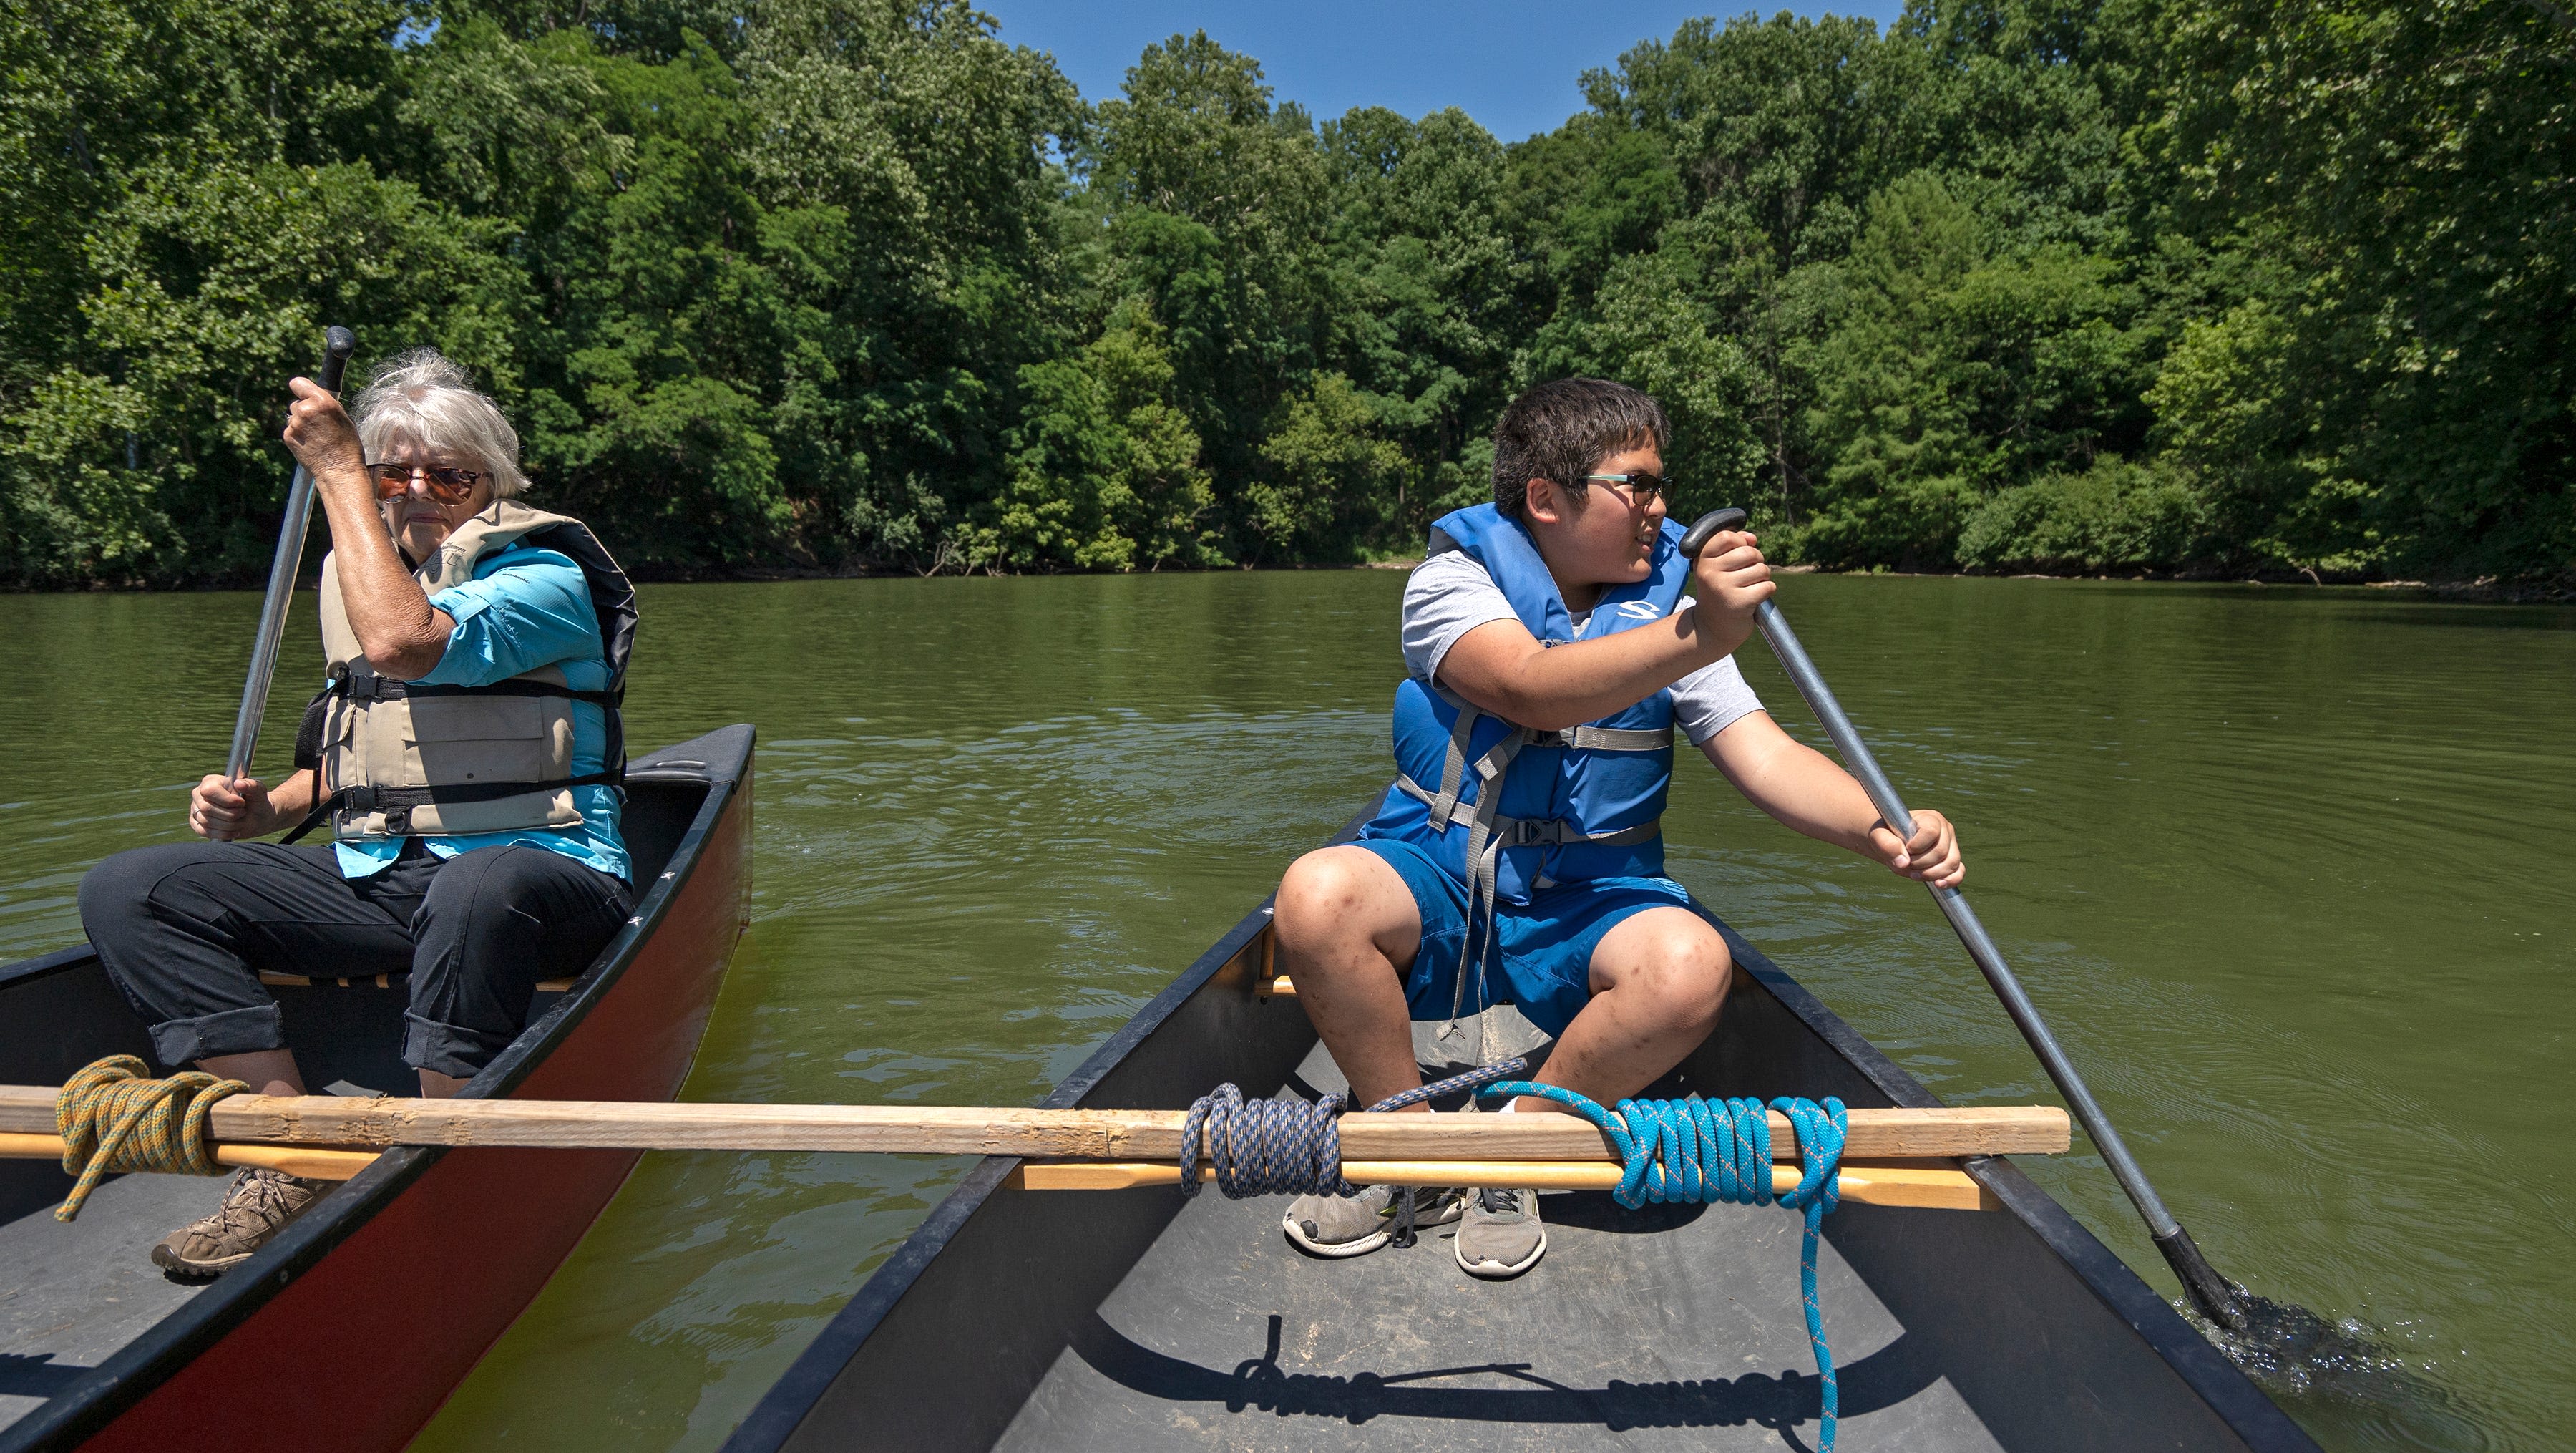 Paddling and fossil beds: Get outside this weekend with these Indiana events